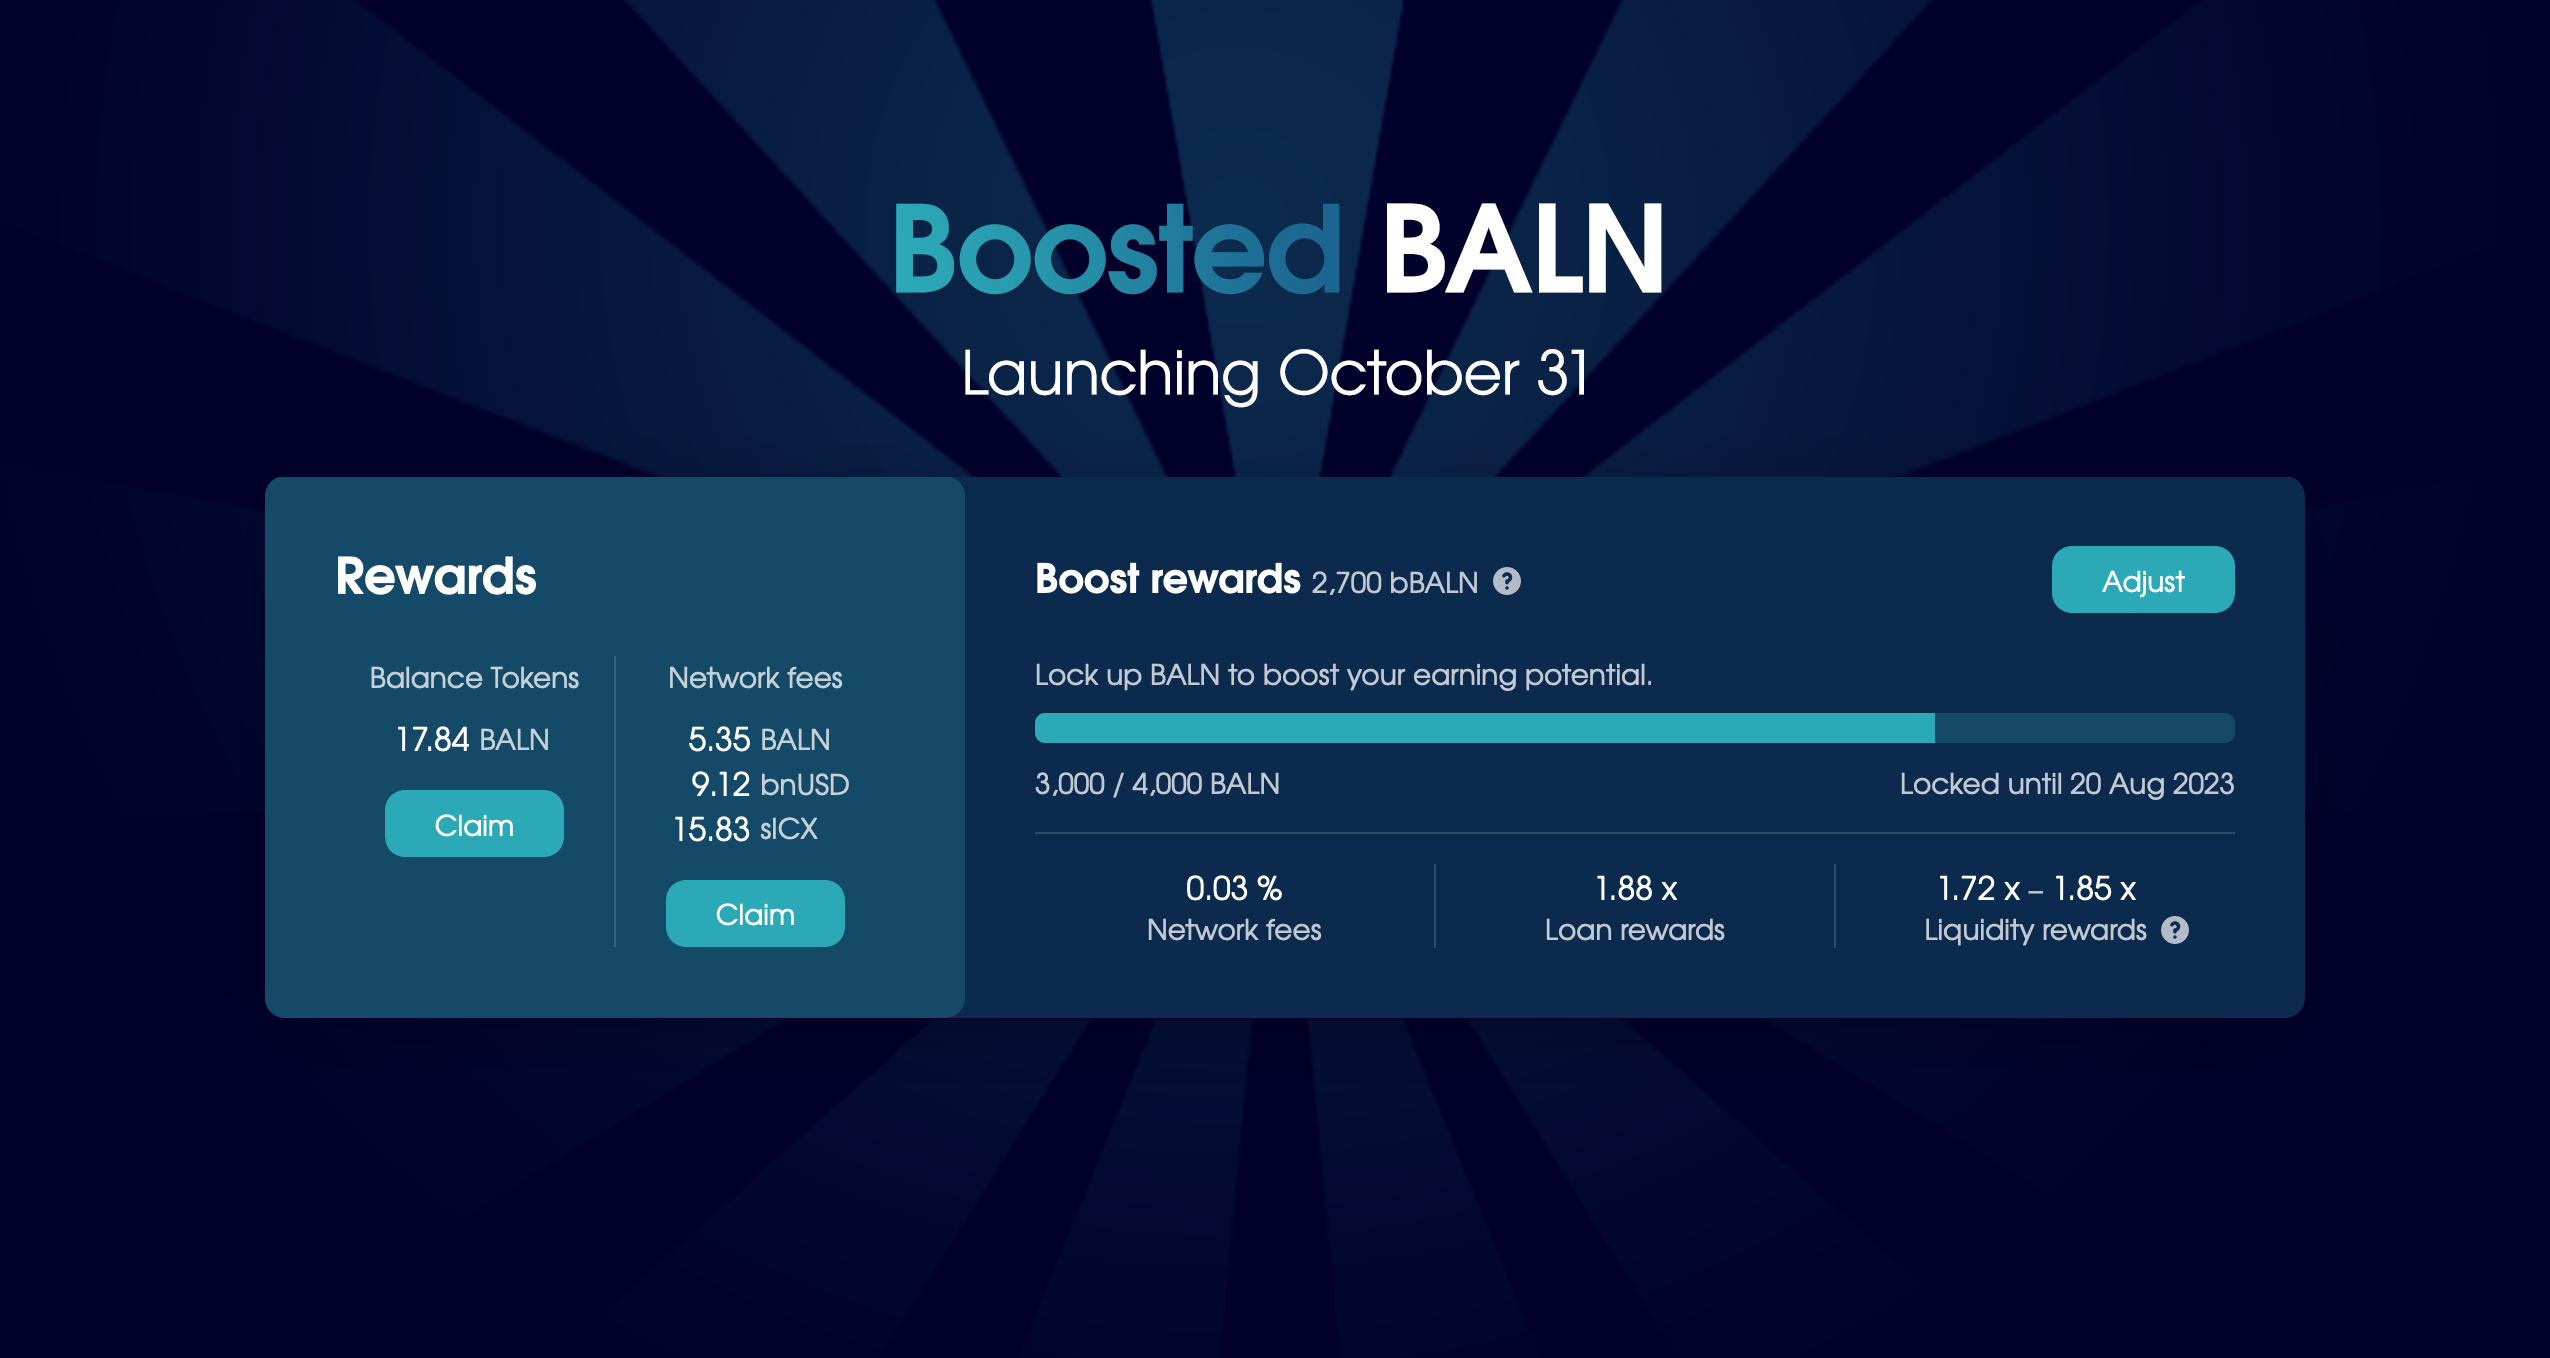 Prepare for the Boosted BALN upgrade